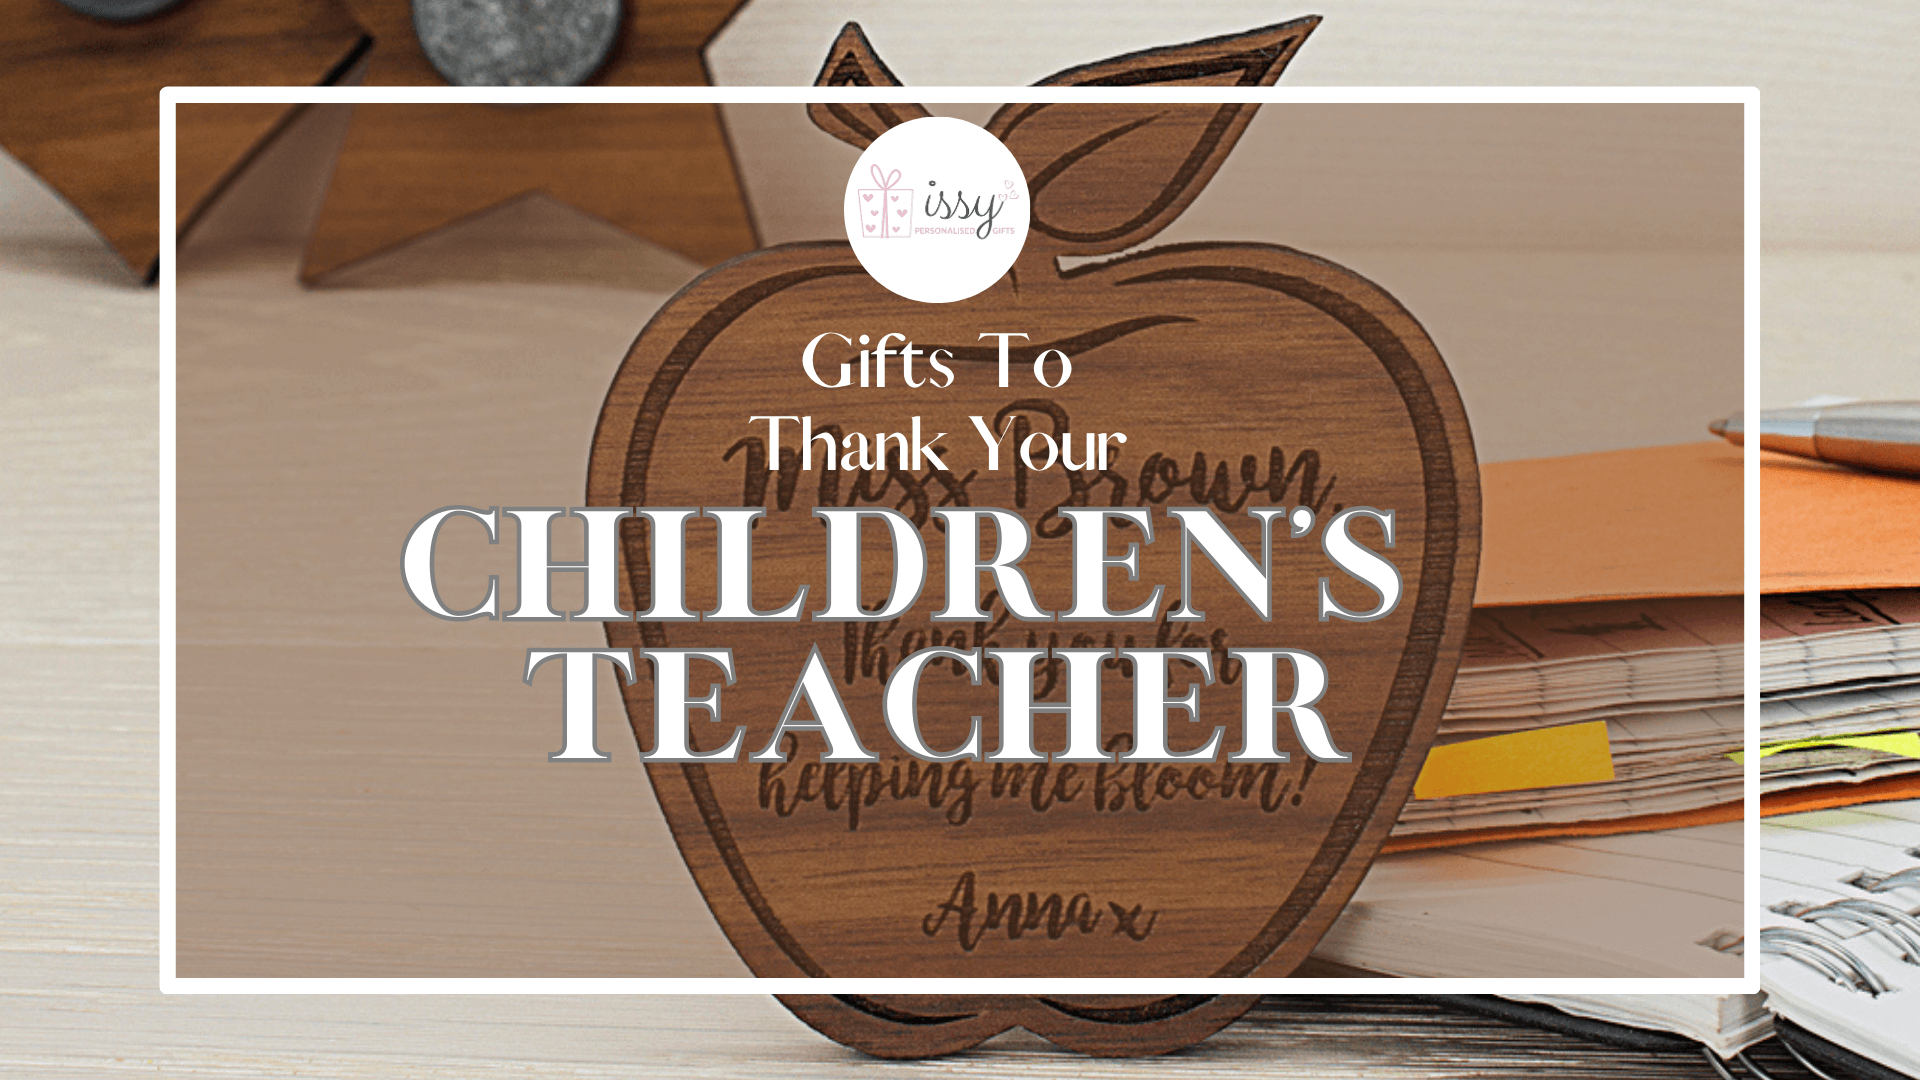 Gifts To Thank Your Children’s Teacher